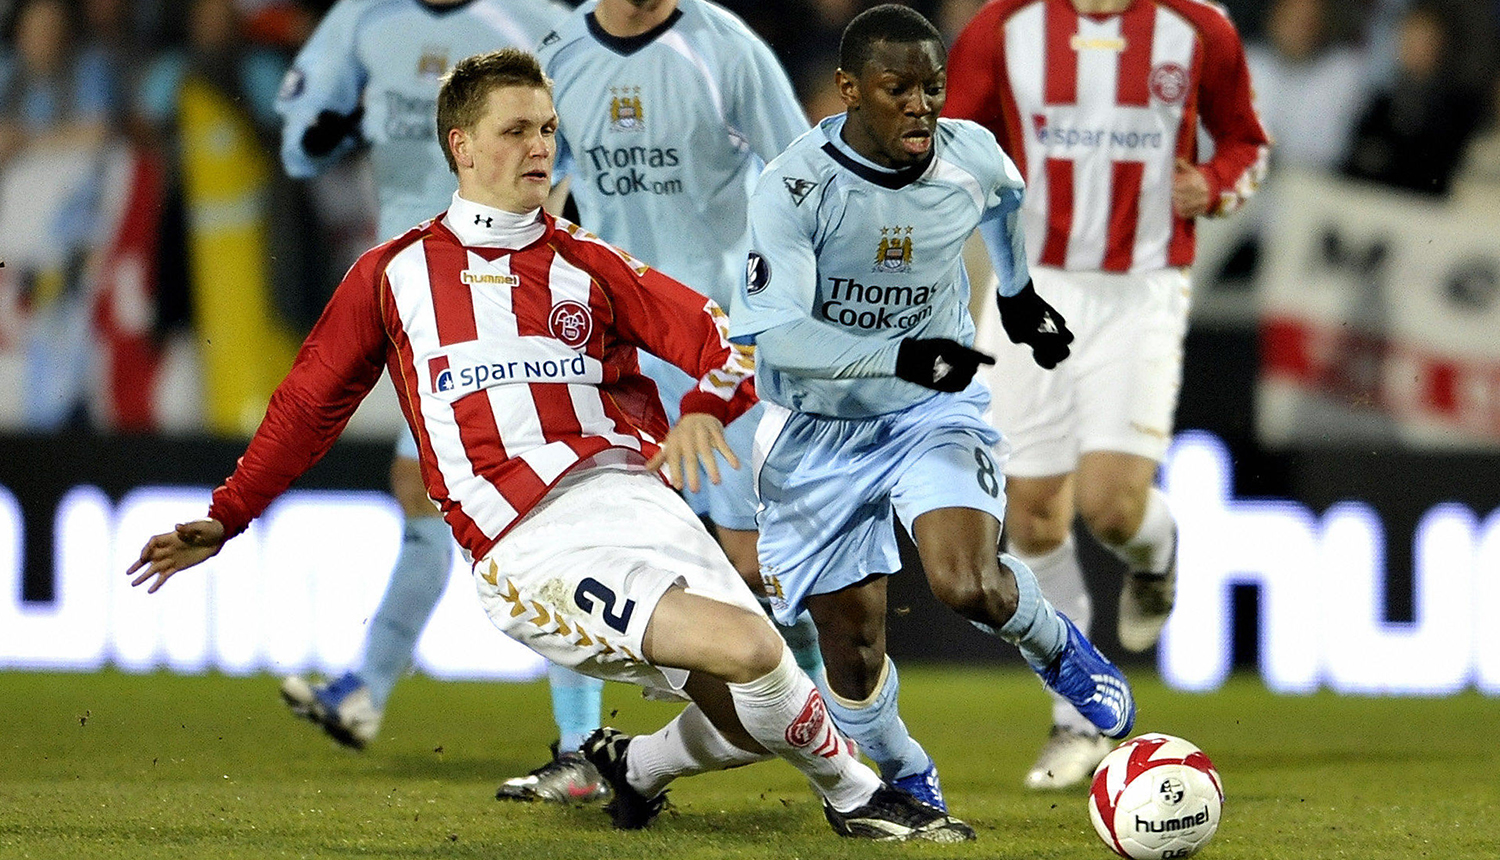 Reds sign Michael Jakobsen from Melbourne City FC on a two-year deal.